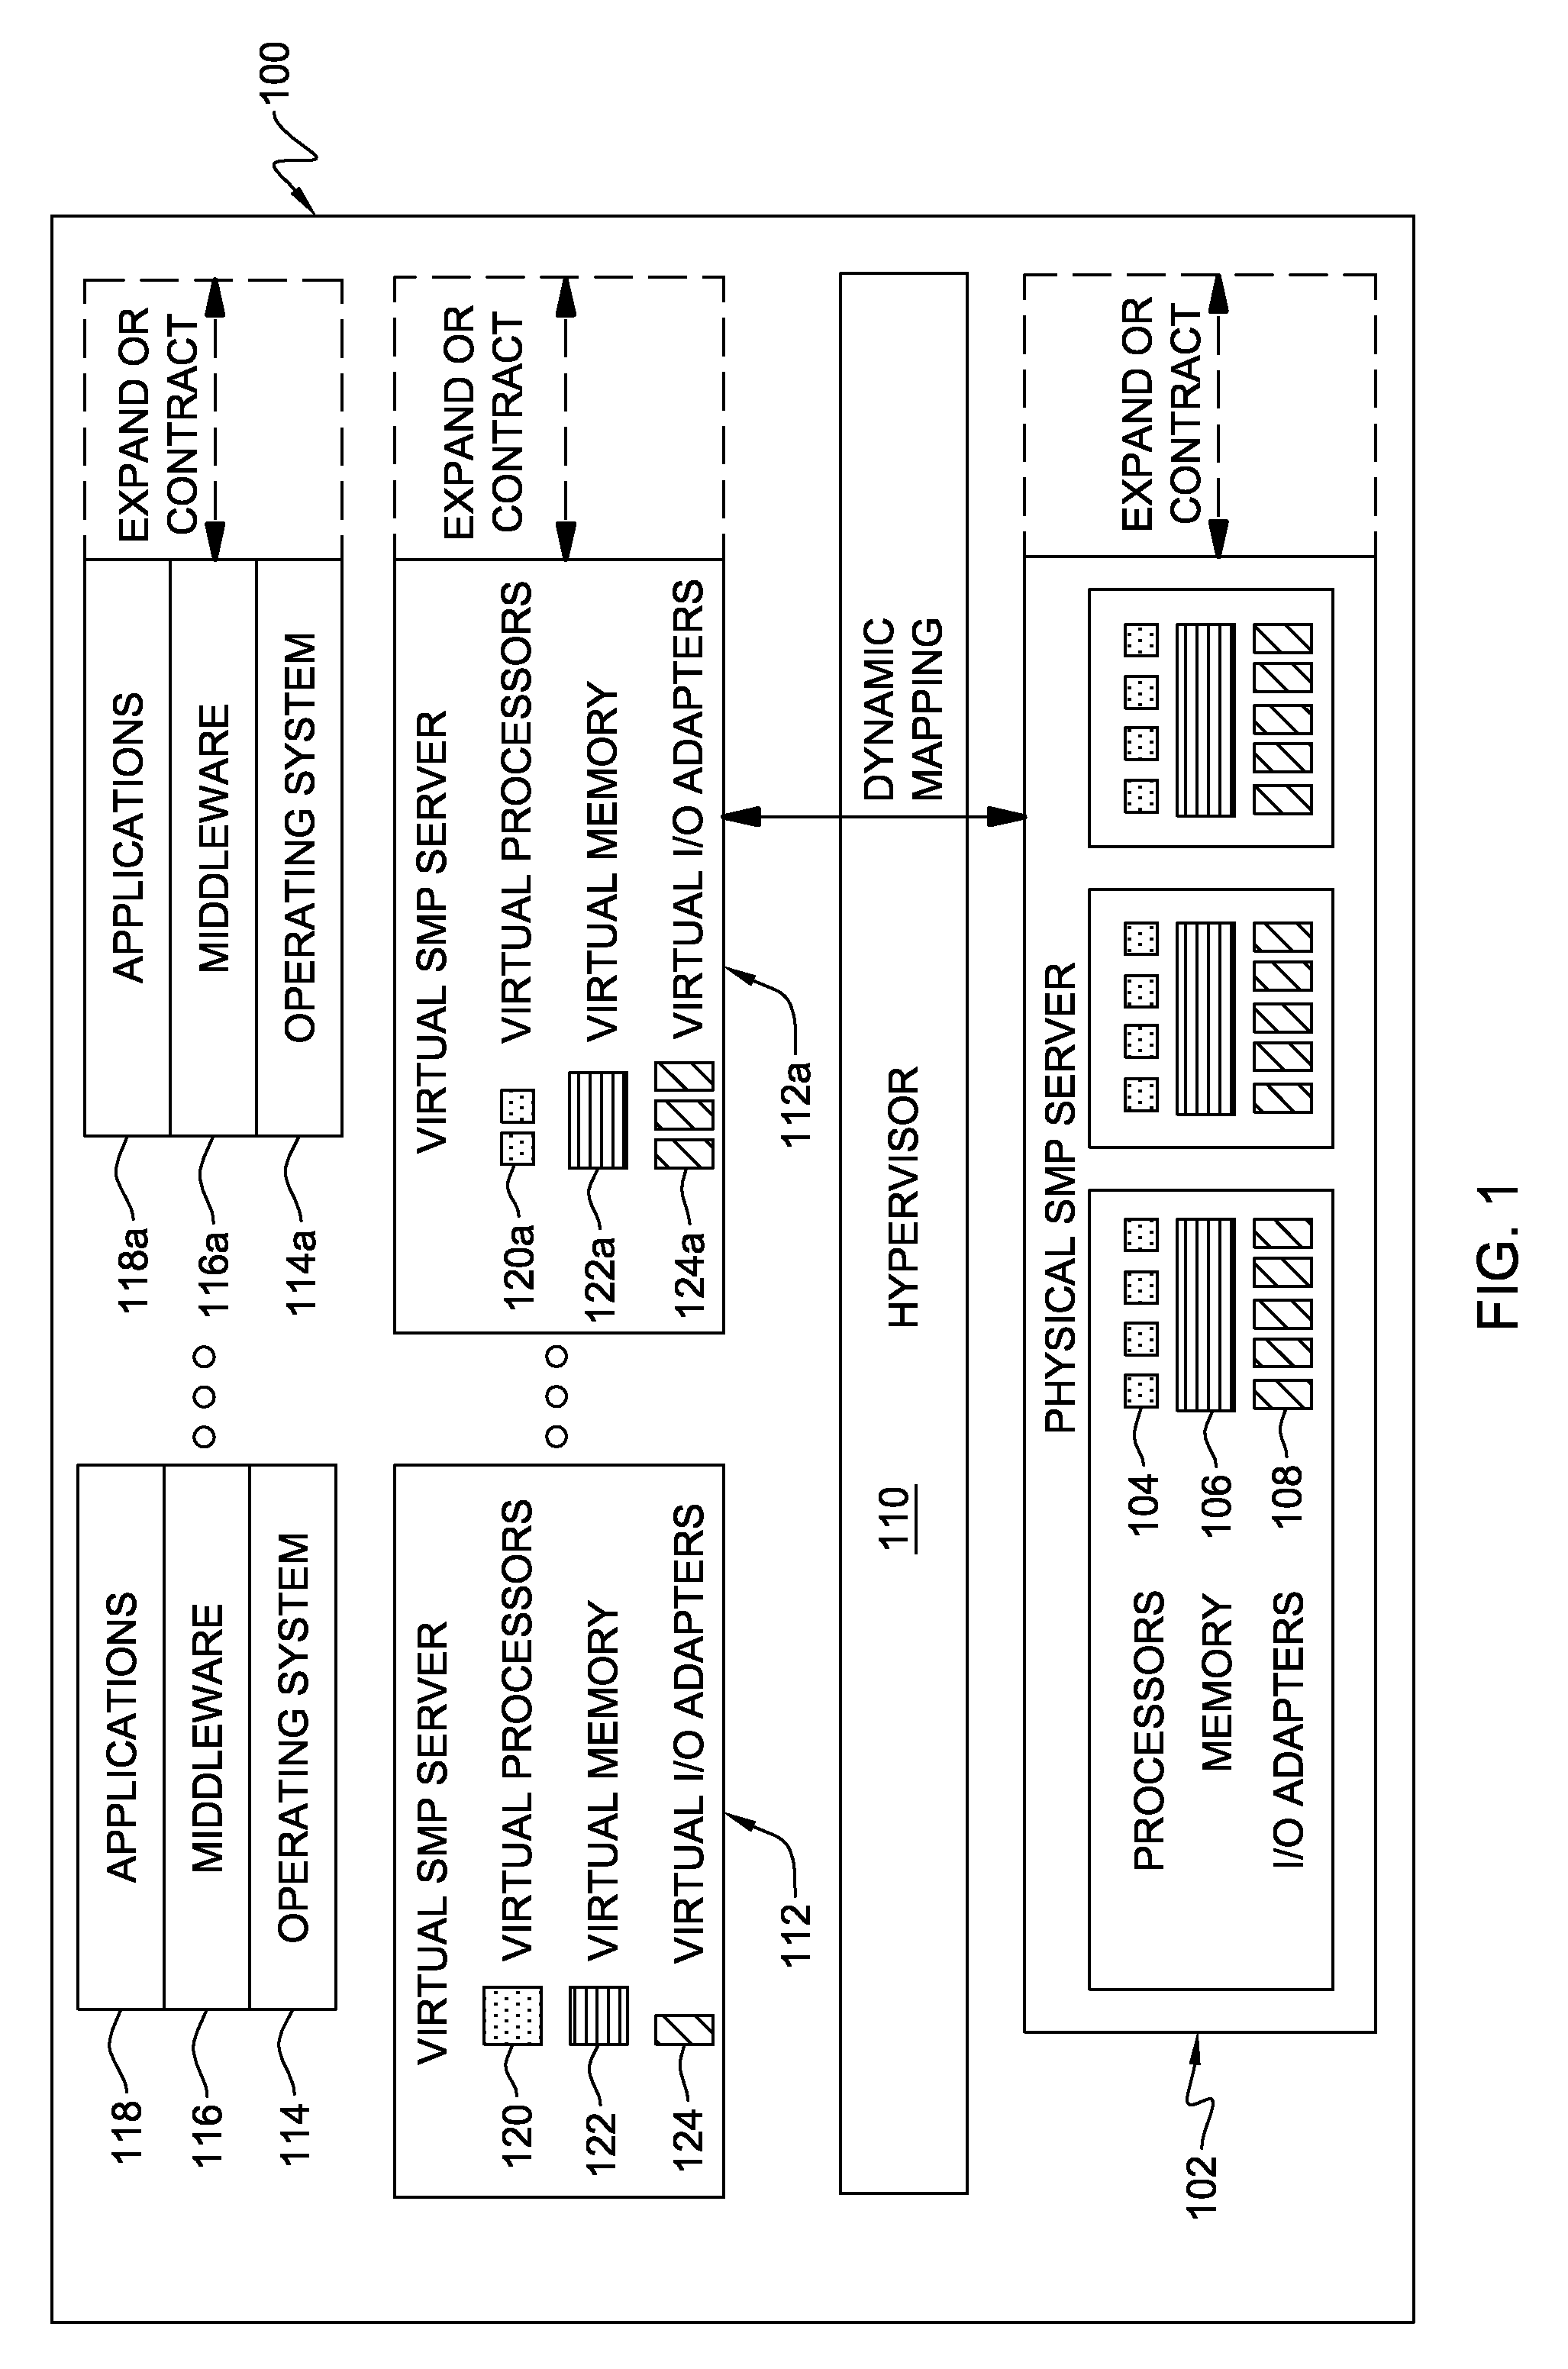 Managing Migration of a Shared Memory Logical Partition from a Source System to a Target System